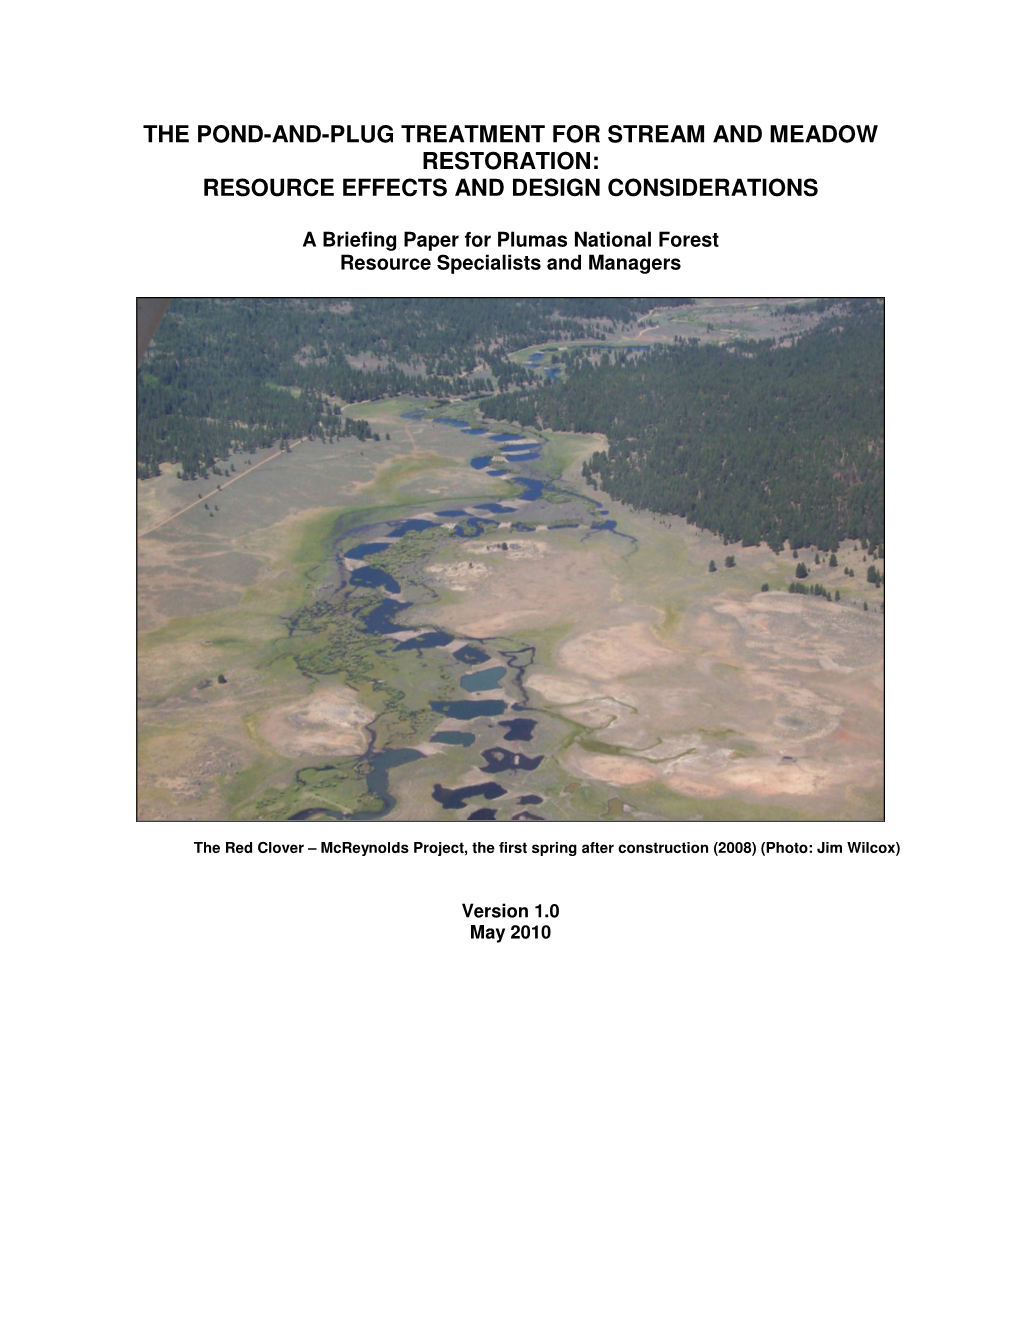 The Pond-And-Plug Treatment for Stream and Meadow Restoration: Resource Effects and Design Considerations